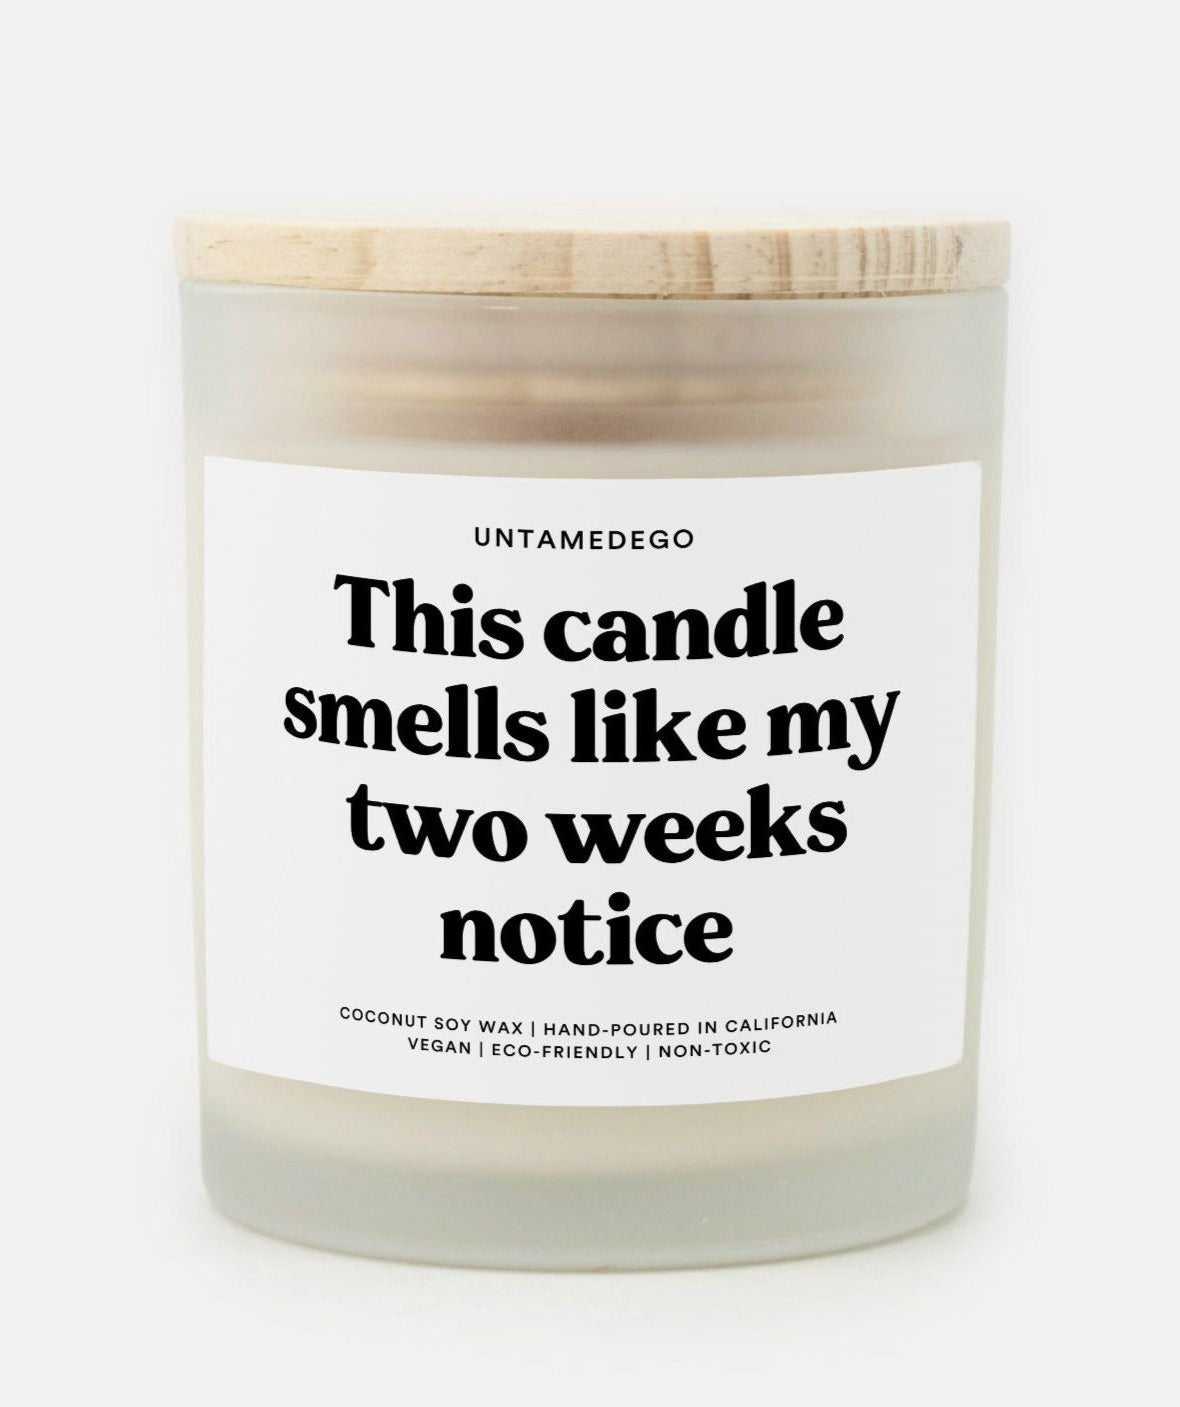 This Candle Smells Like My Two Weeks Notice Frosted Glass Jar Candle - UntamedEgo LLC.